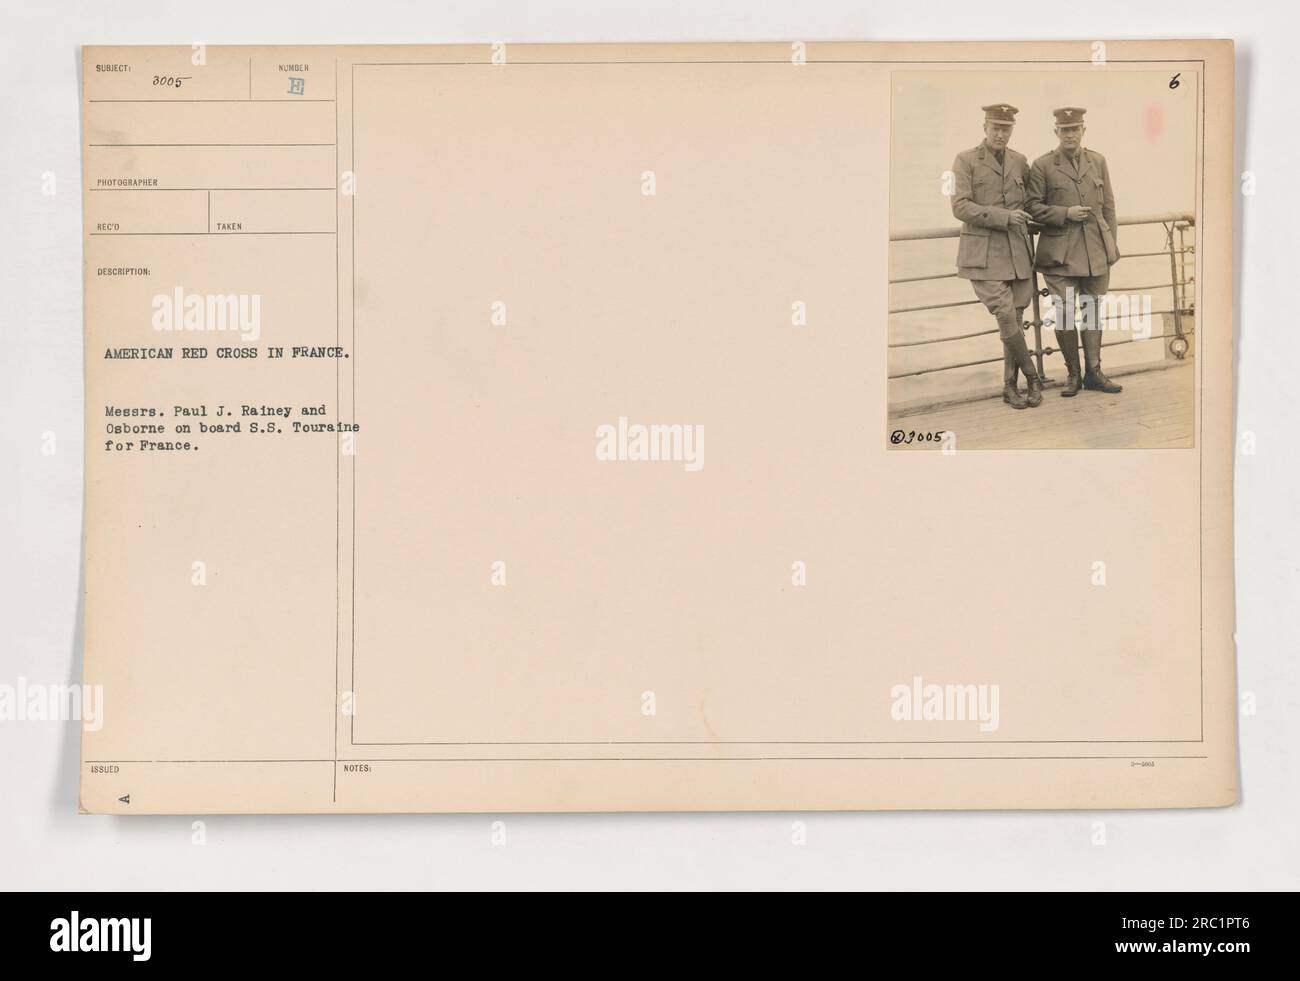 Mr. Paul J. Rainey and Mr. Osborne aboard the S.S. Touraine en route to France as part of the American Red Cross in France. This photo was issued by NUMA and taken by the subject photographer. Notes indicate a date of 2005. Stock Photo